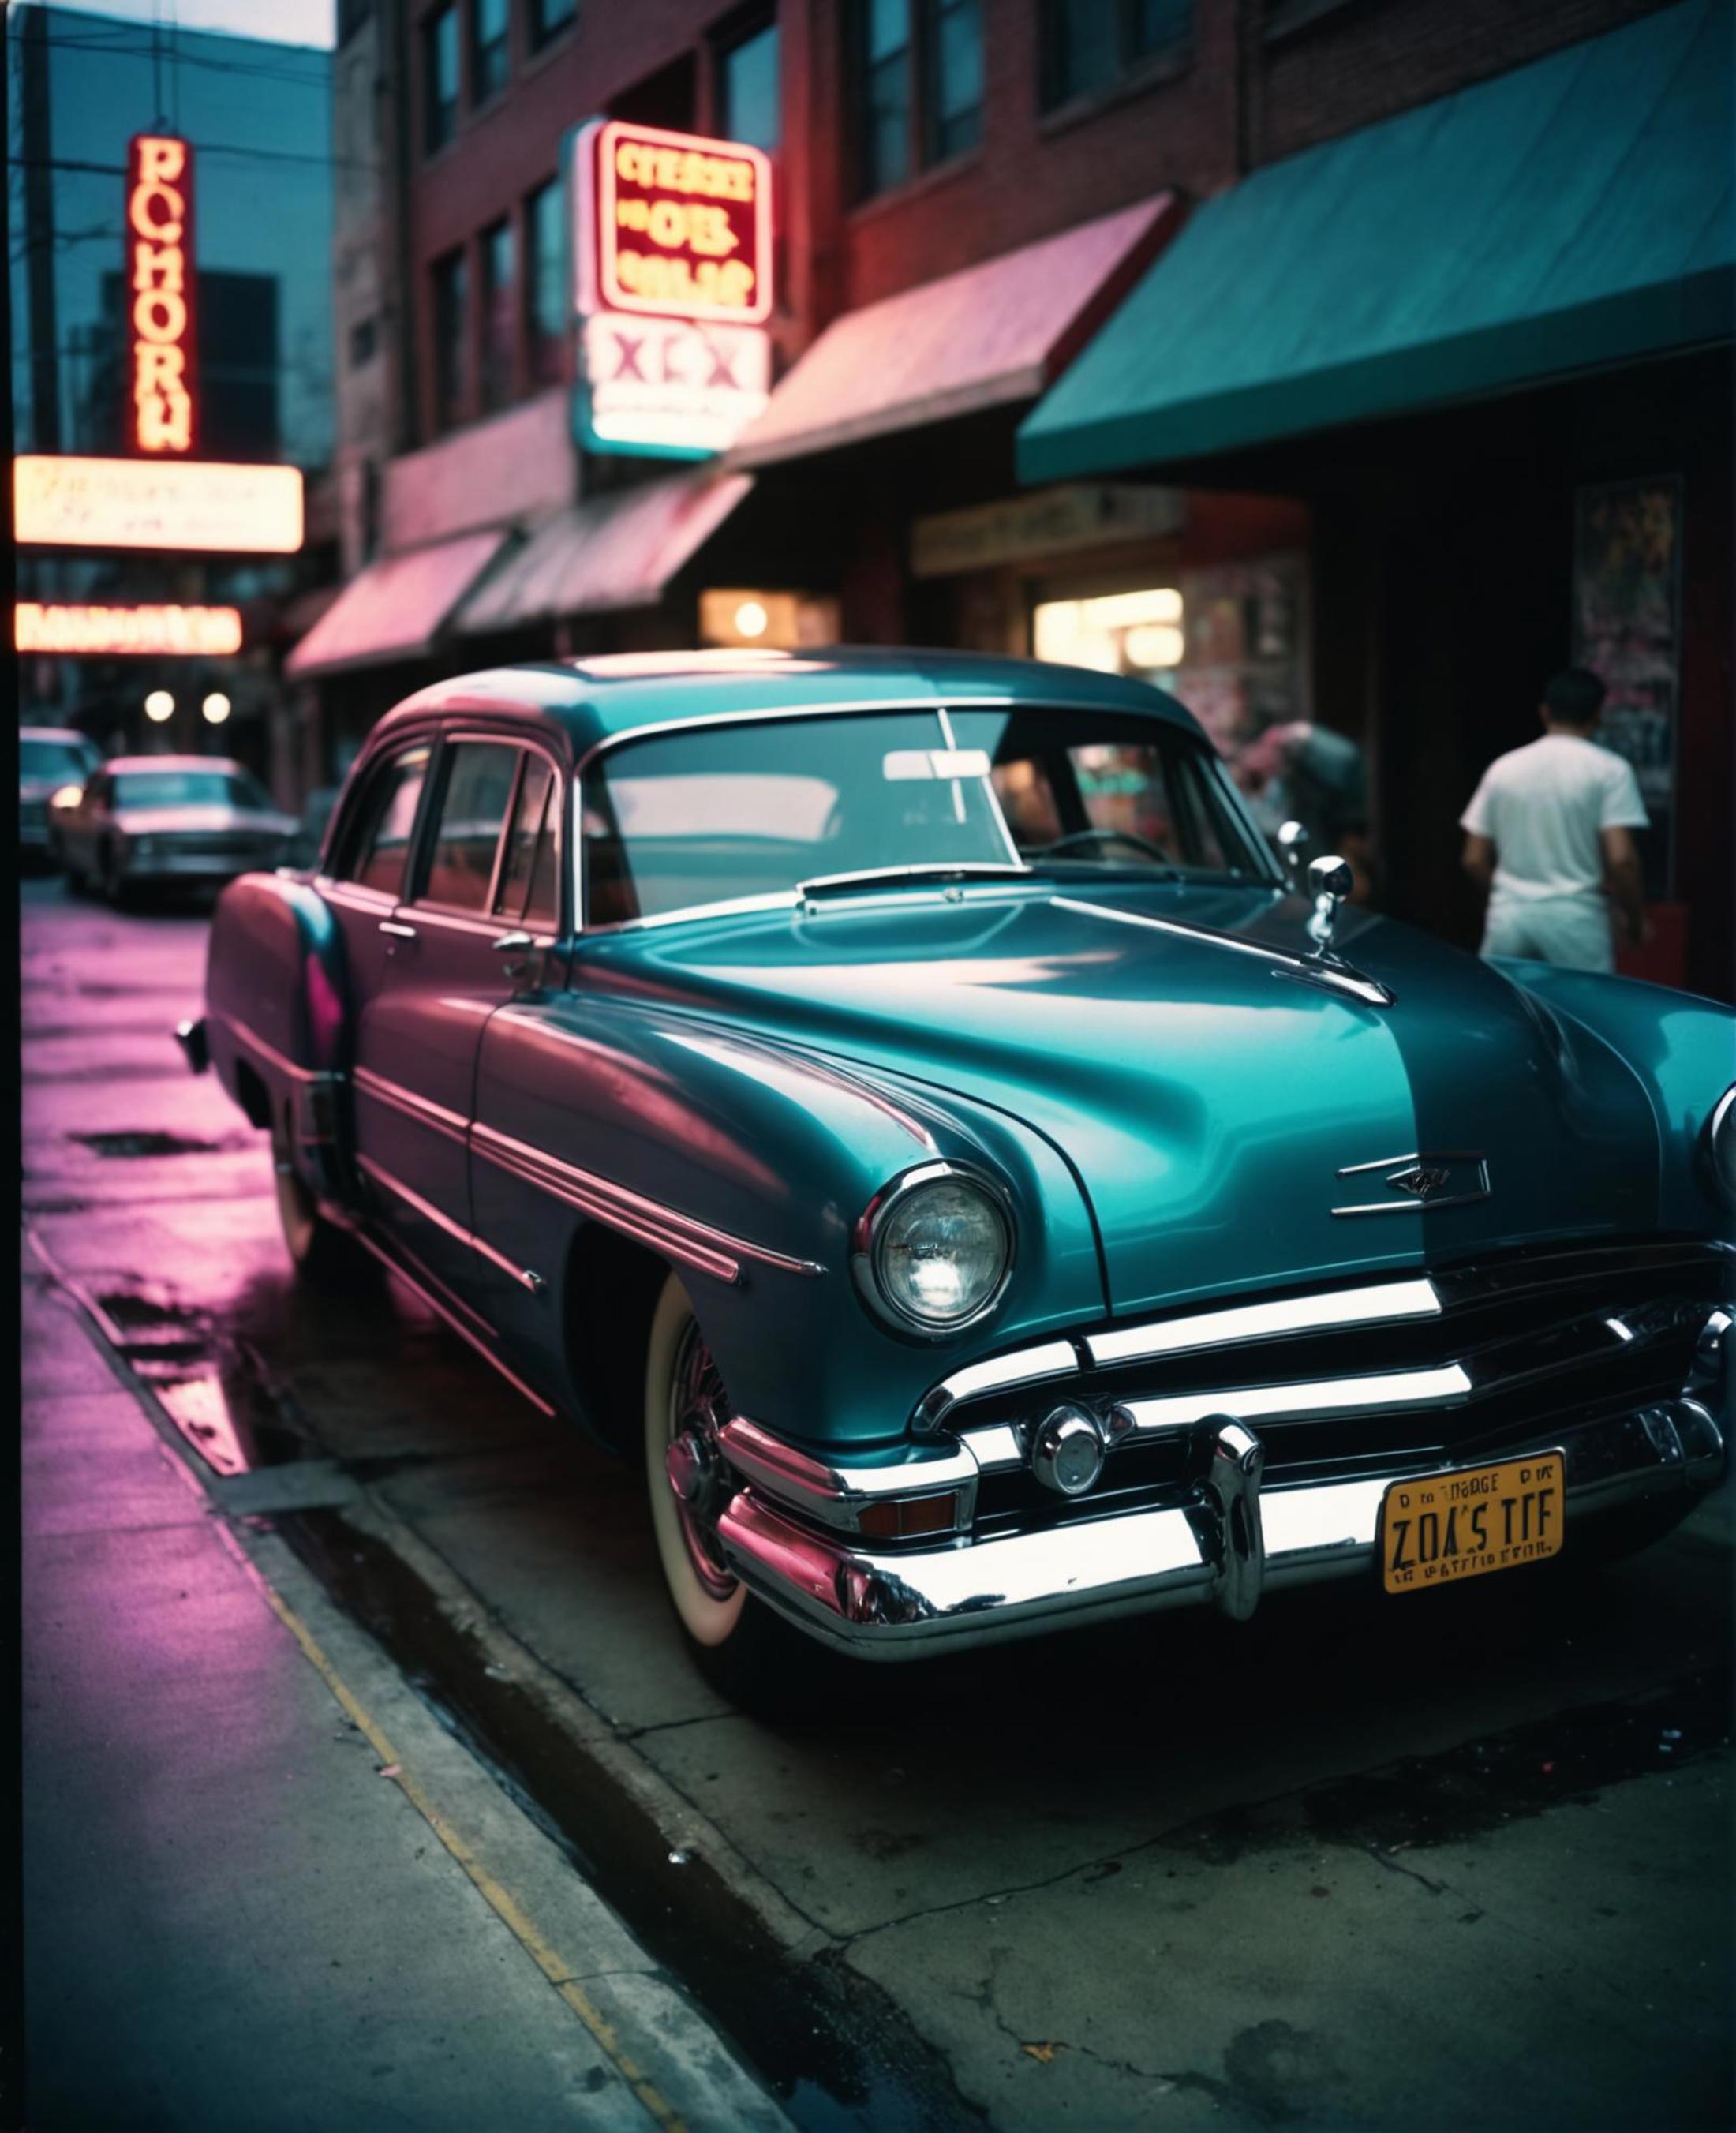 A blue classic car parked on a city street with a neon sign in the background.